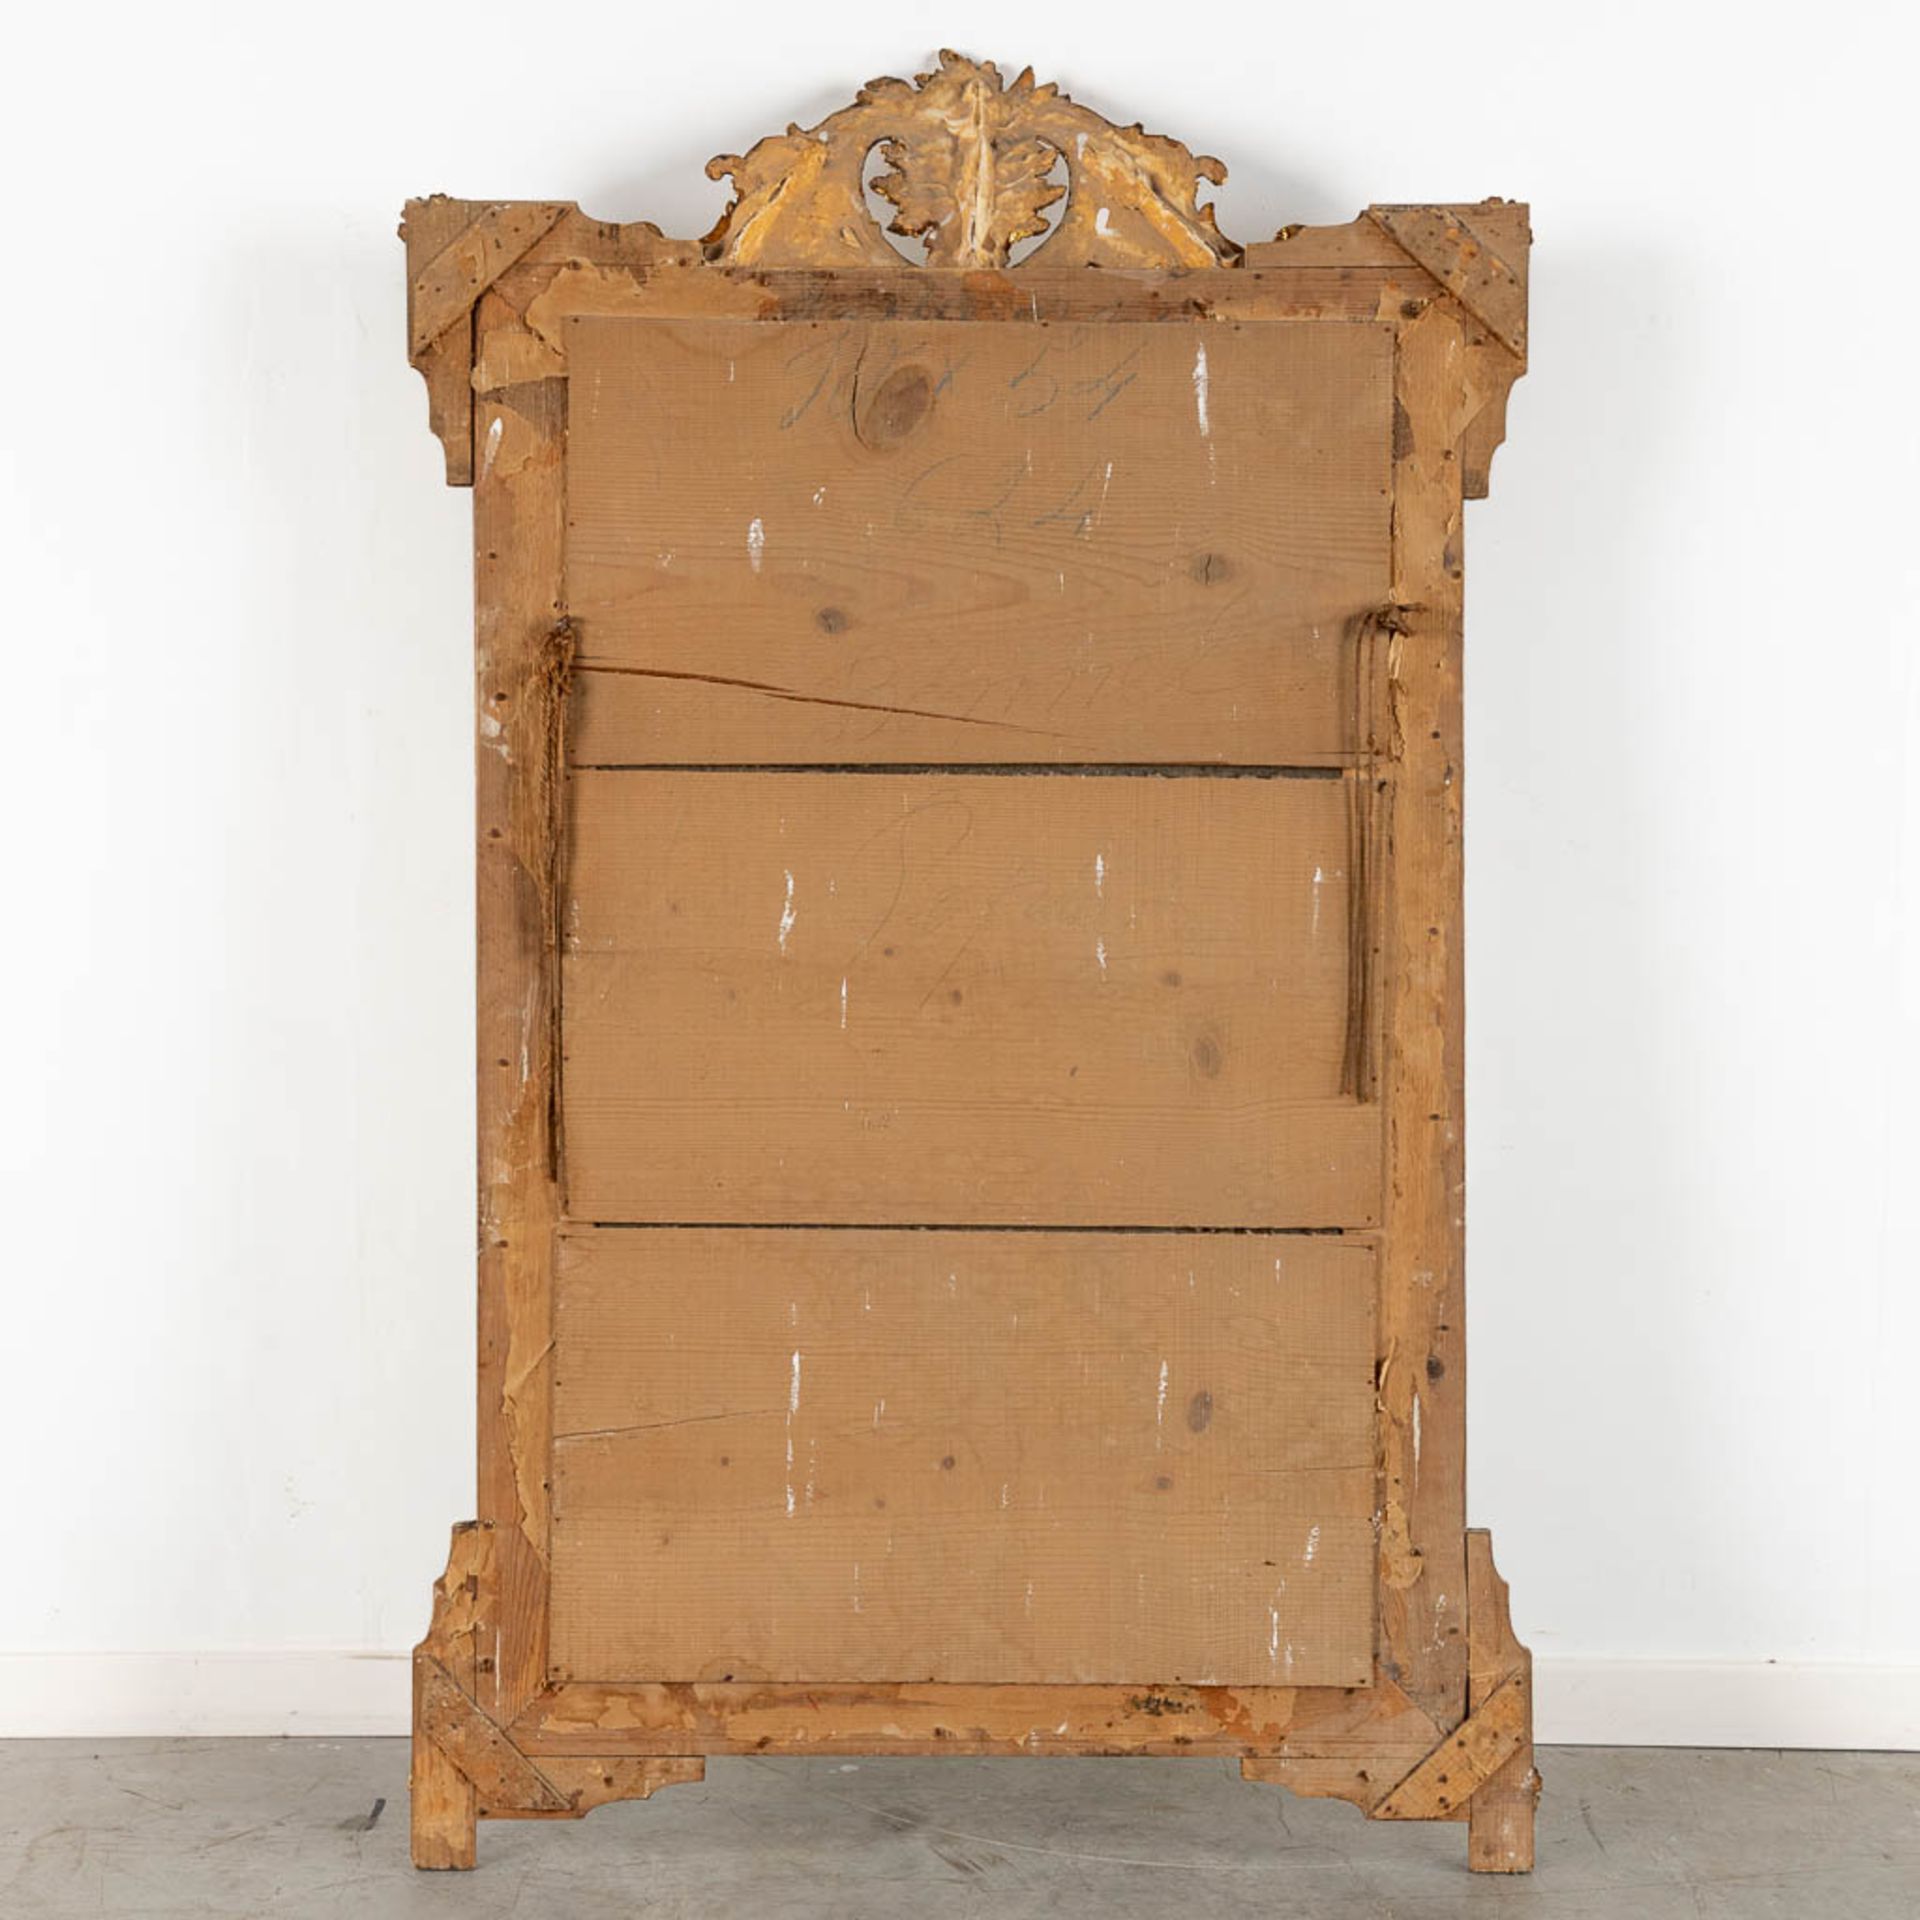 A mirror, sculptured wood and gilt stucco. Circa 1900. (W:135 x H:85 cm) - Image 8 of 8